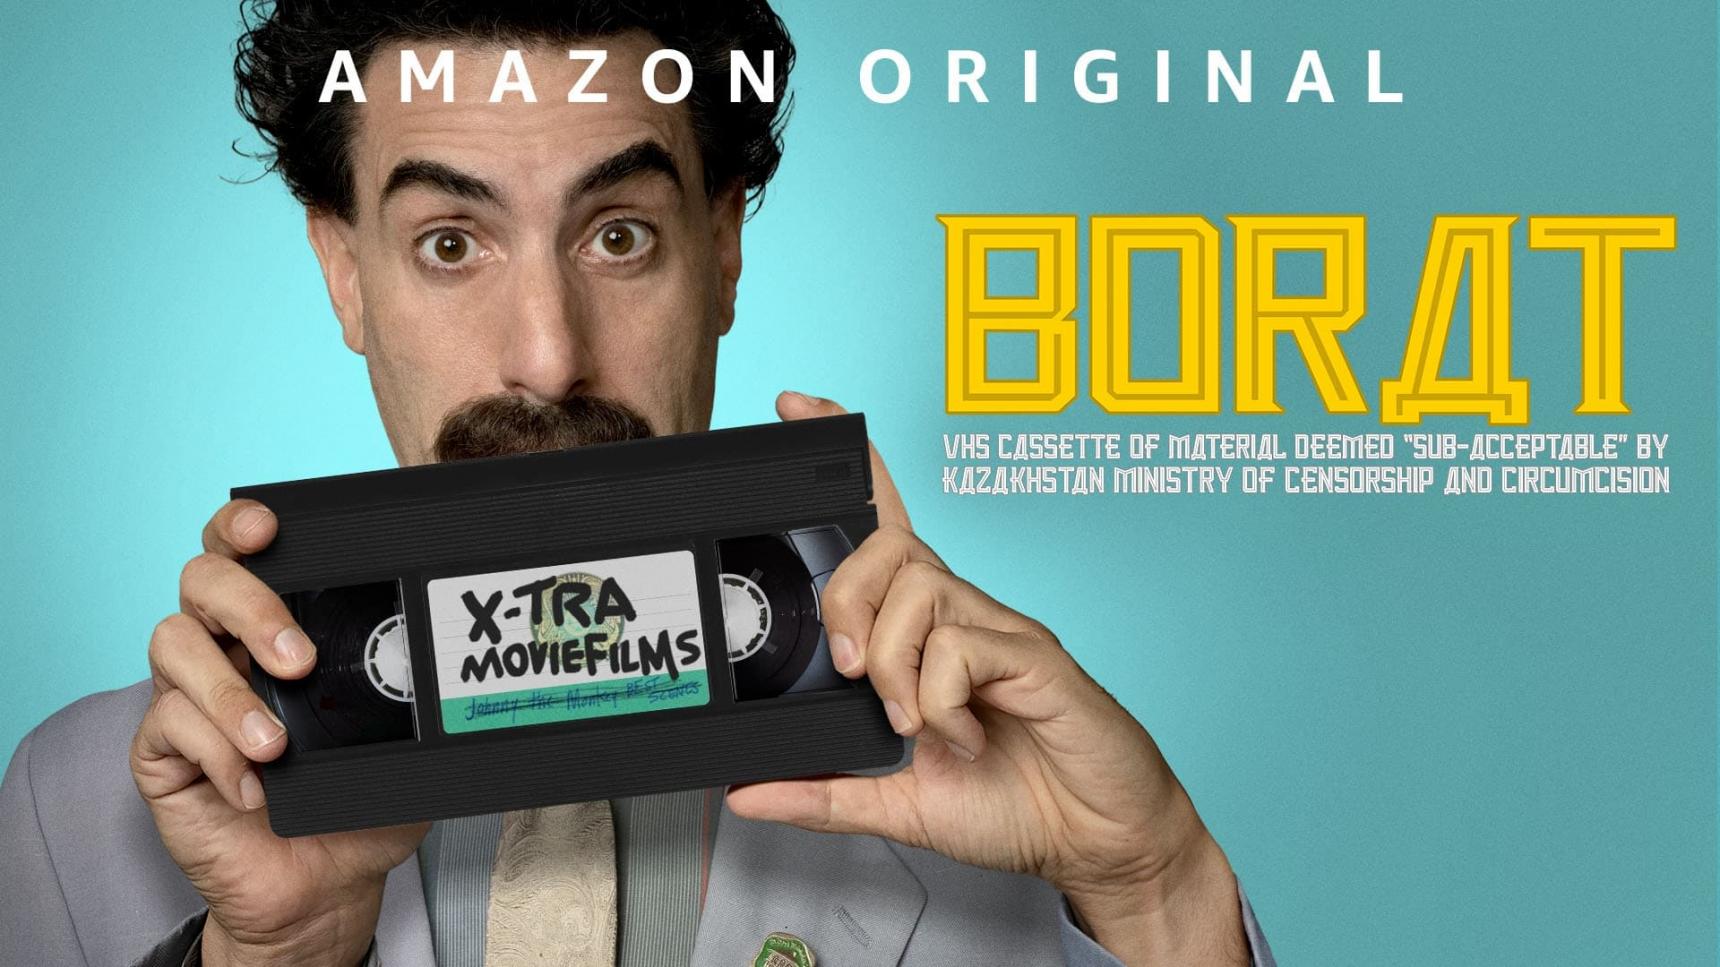 trailer Borat: VHS Cassette of Material Deemed “Sub-acceptable” By Kazakhstan Ministry of Censorship and Circumcision